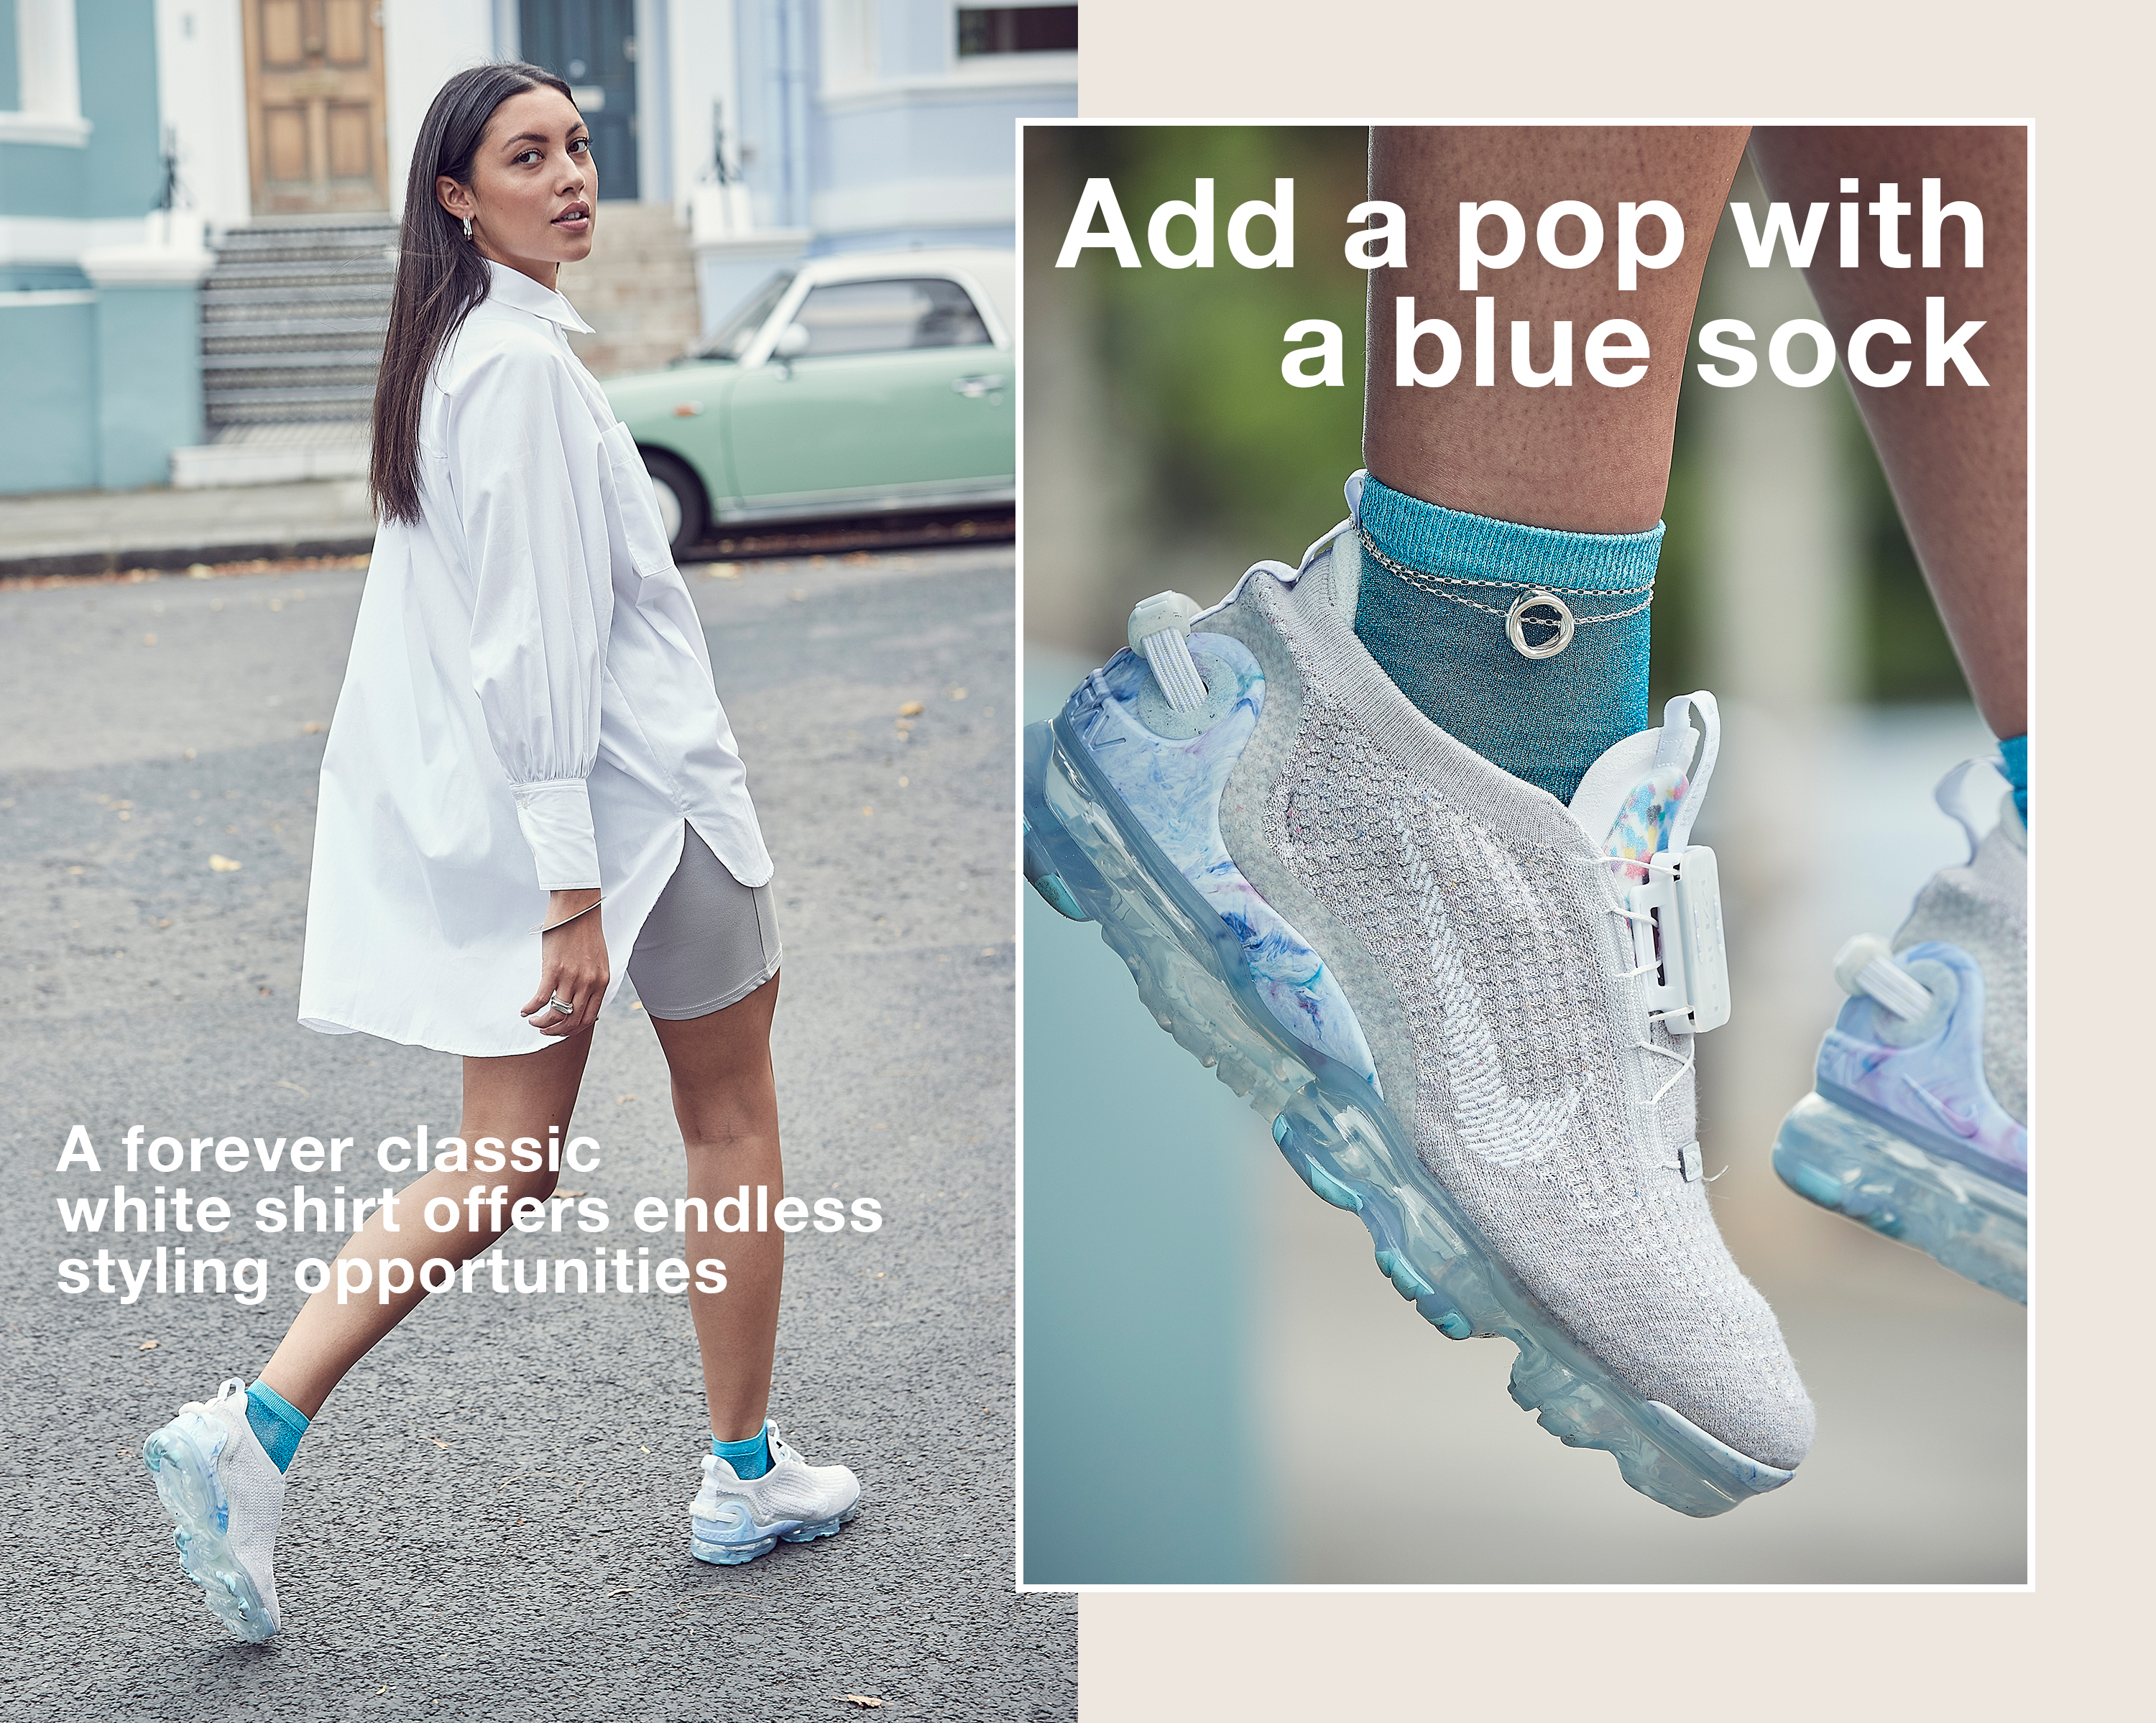 How to Style: Nike VaporMax 2020 (Outfit Ideas)